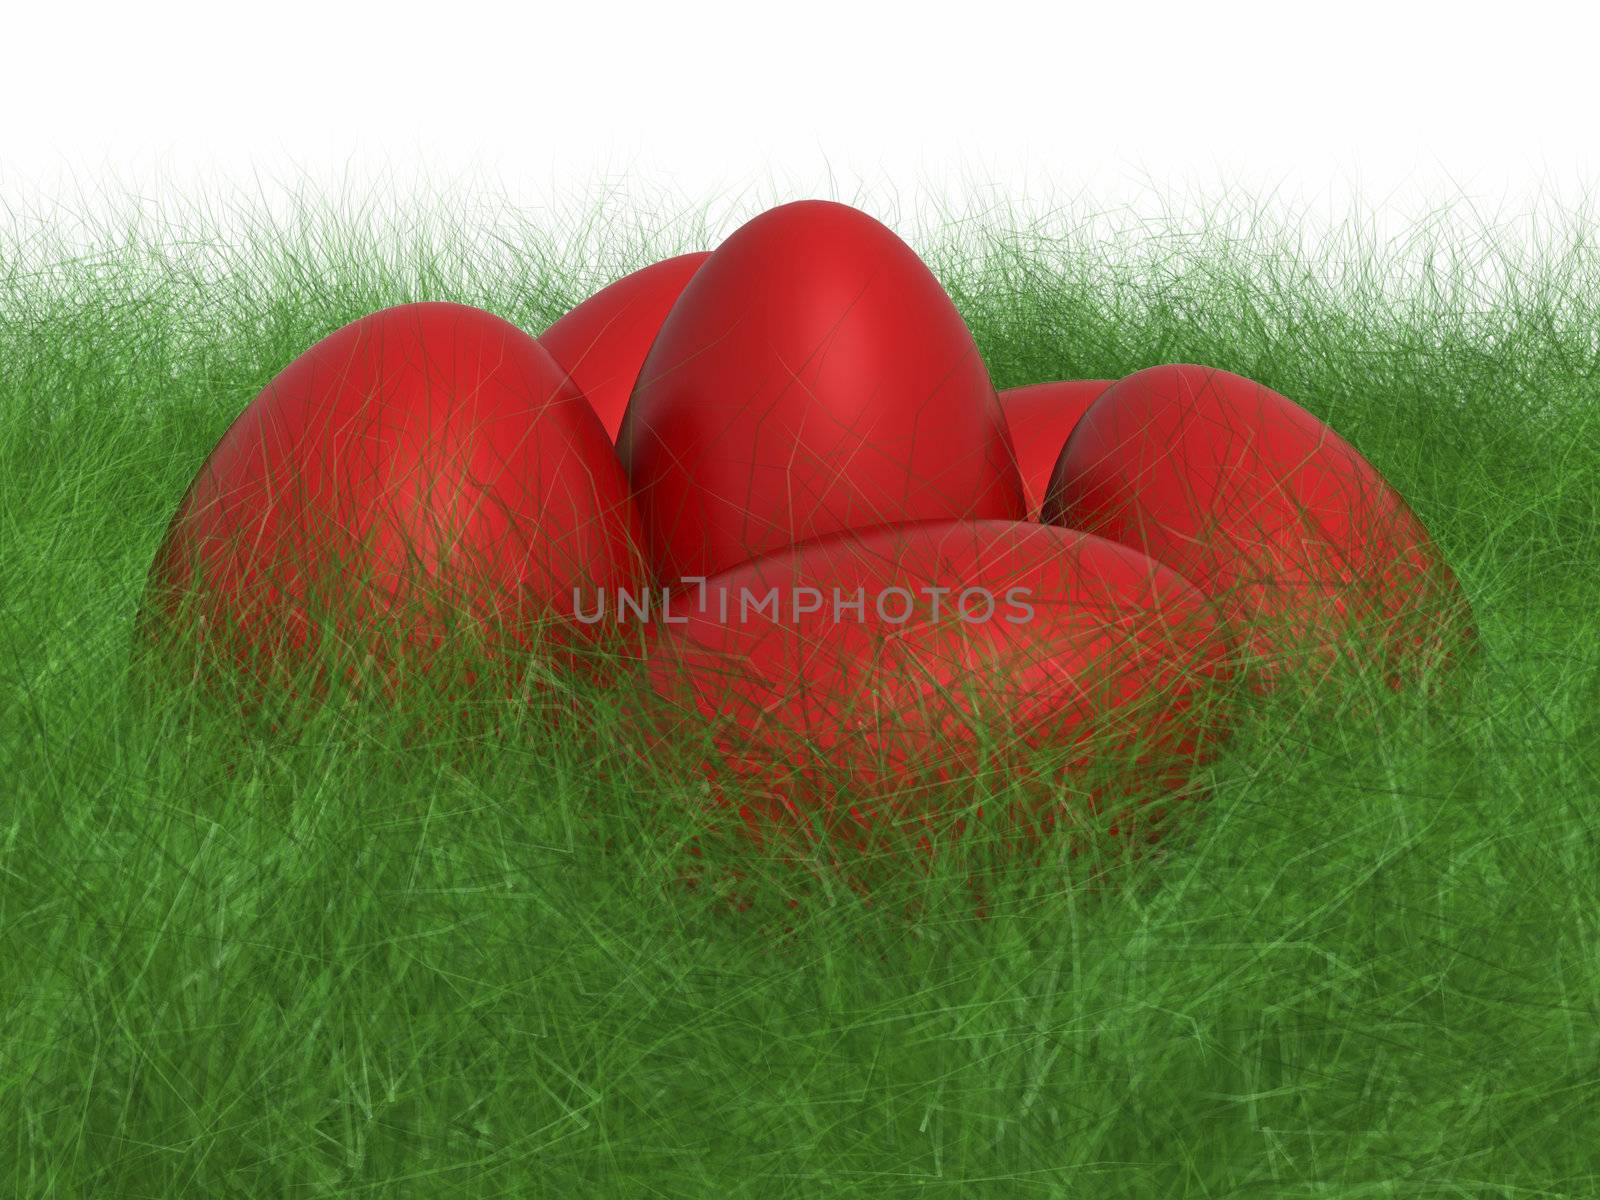 Red Easter eggs on grass